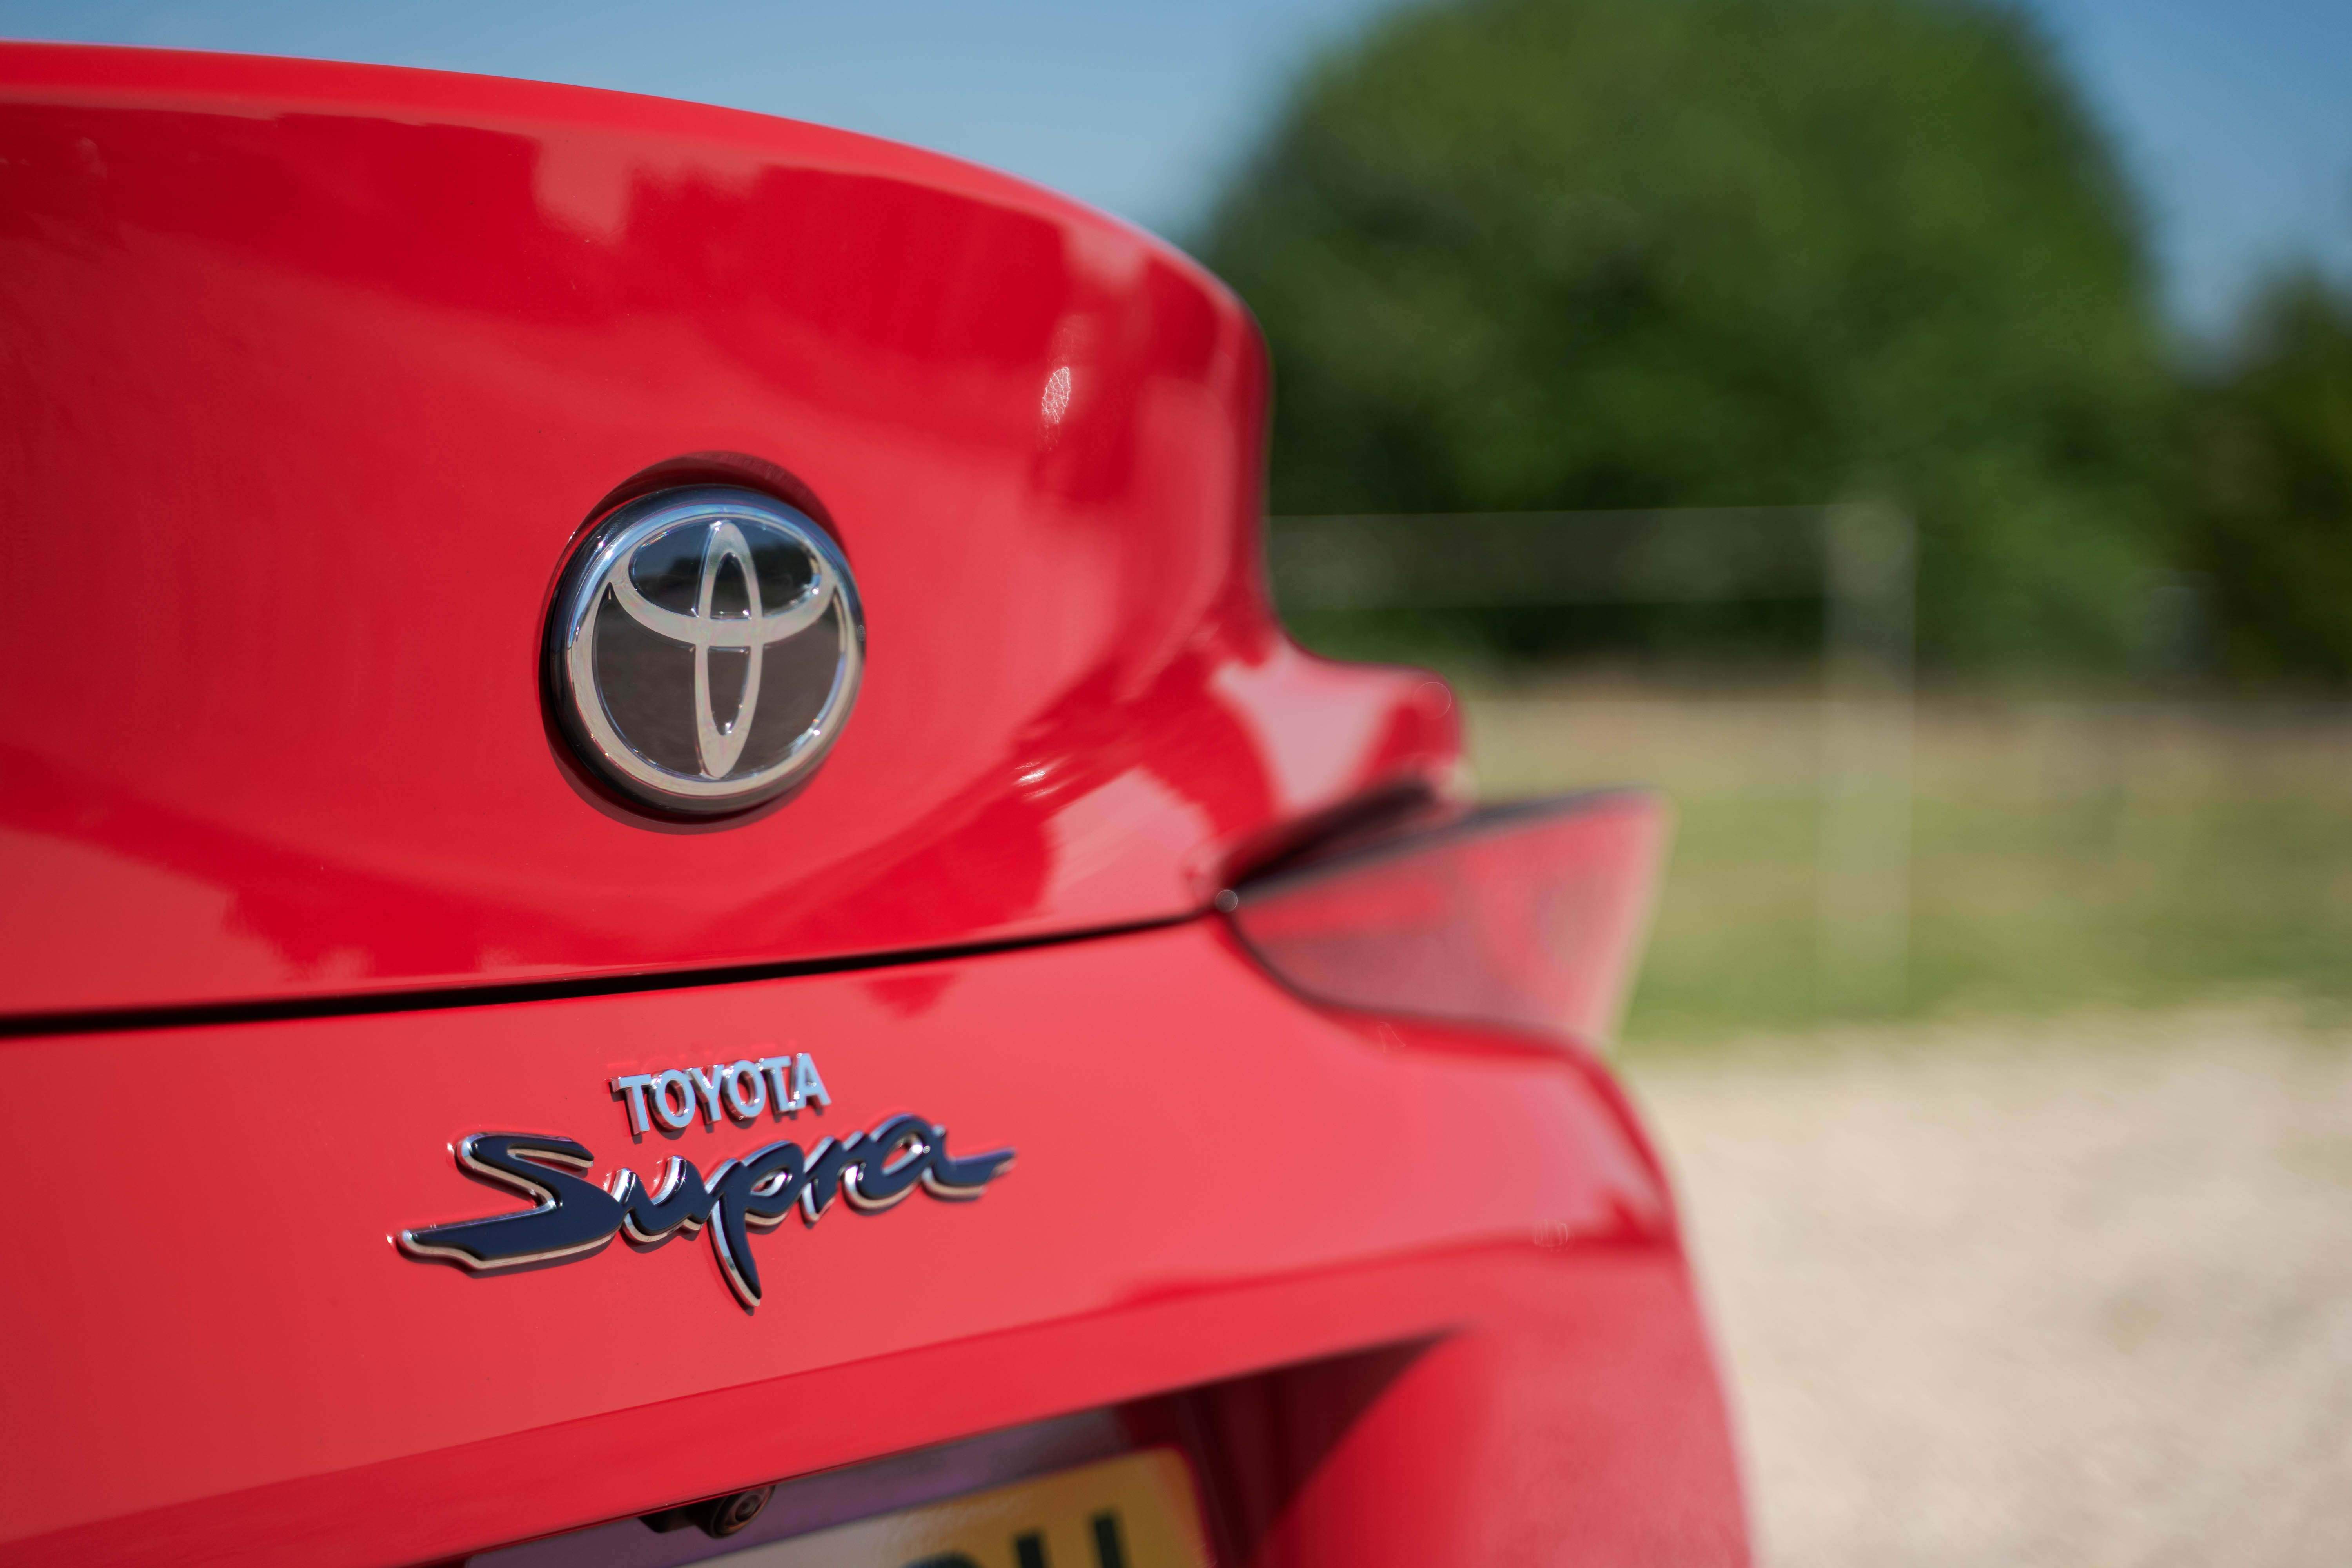 The Supra takes on a legendary nameplate 